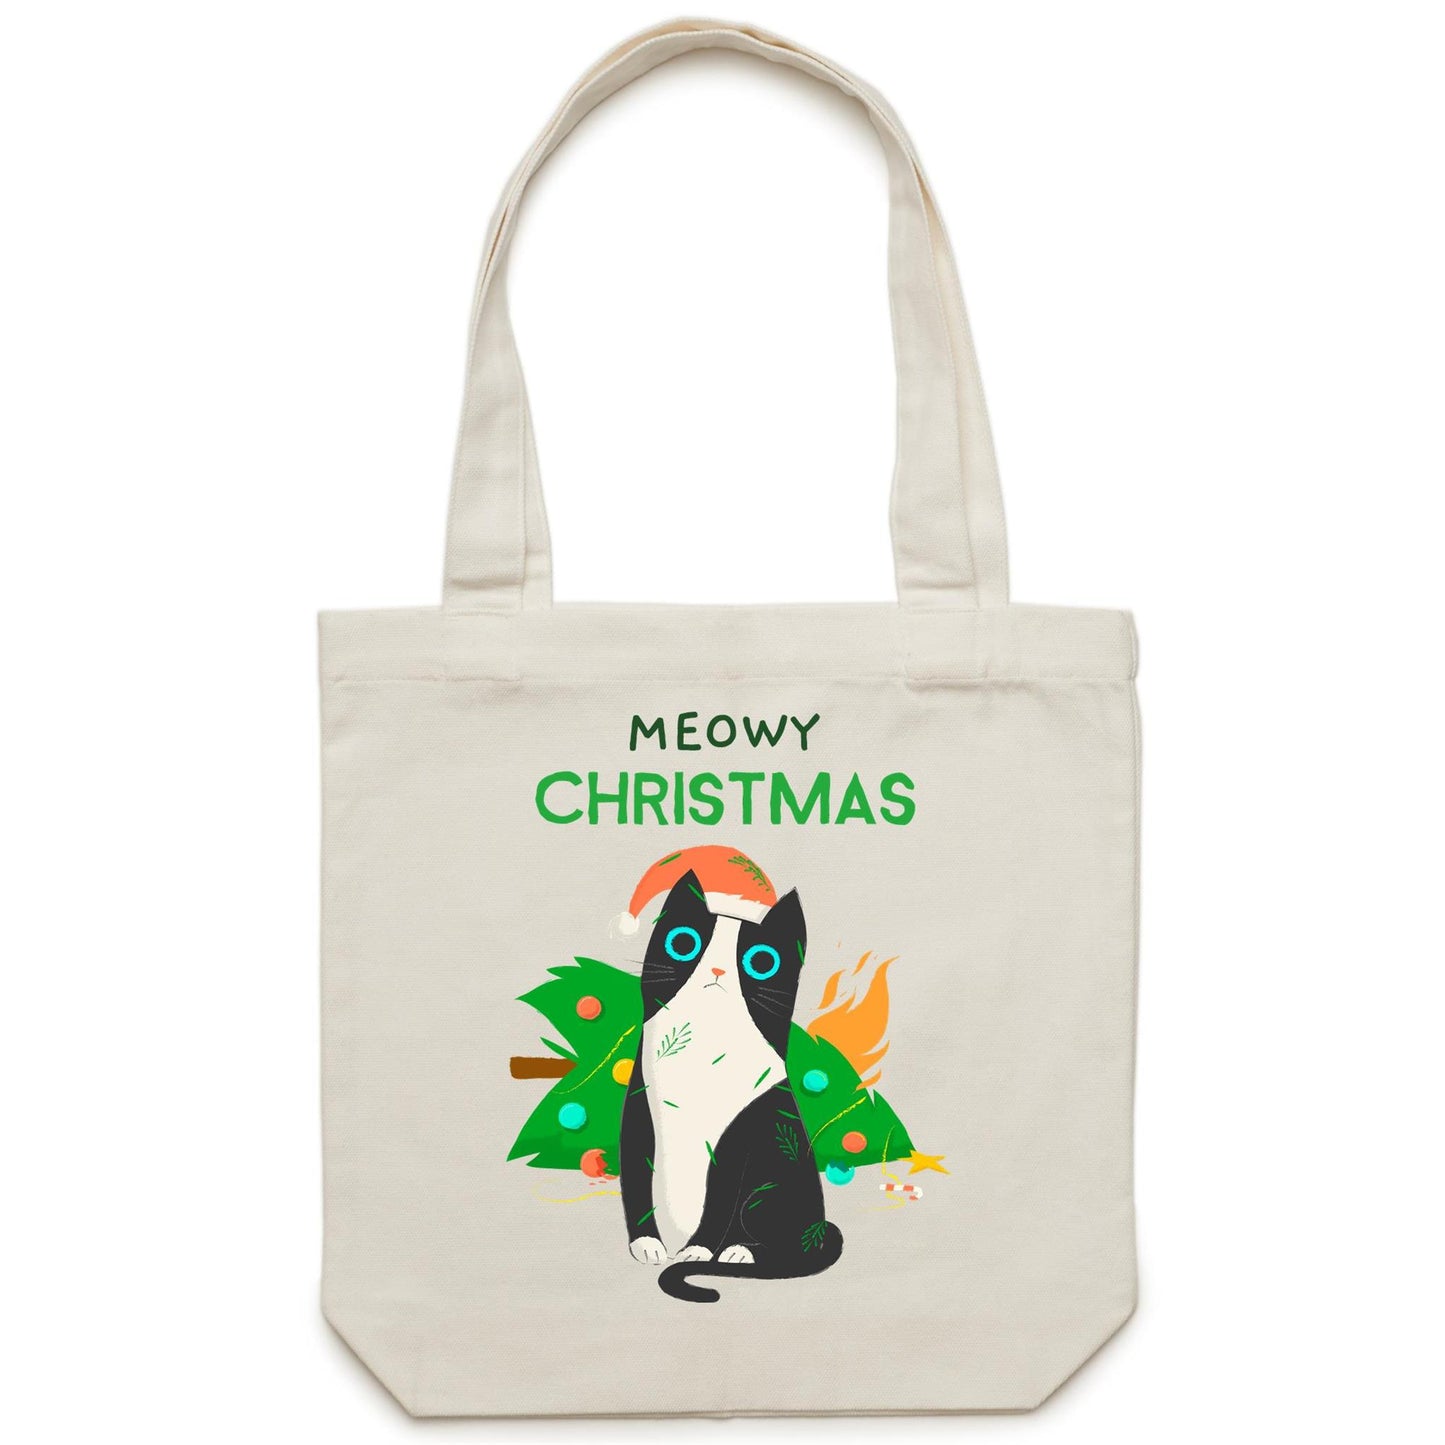 Meowy Christmas - Canvas Tote Bag Cream One Size Christmas Tote Bag Merry Christmas